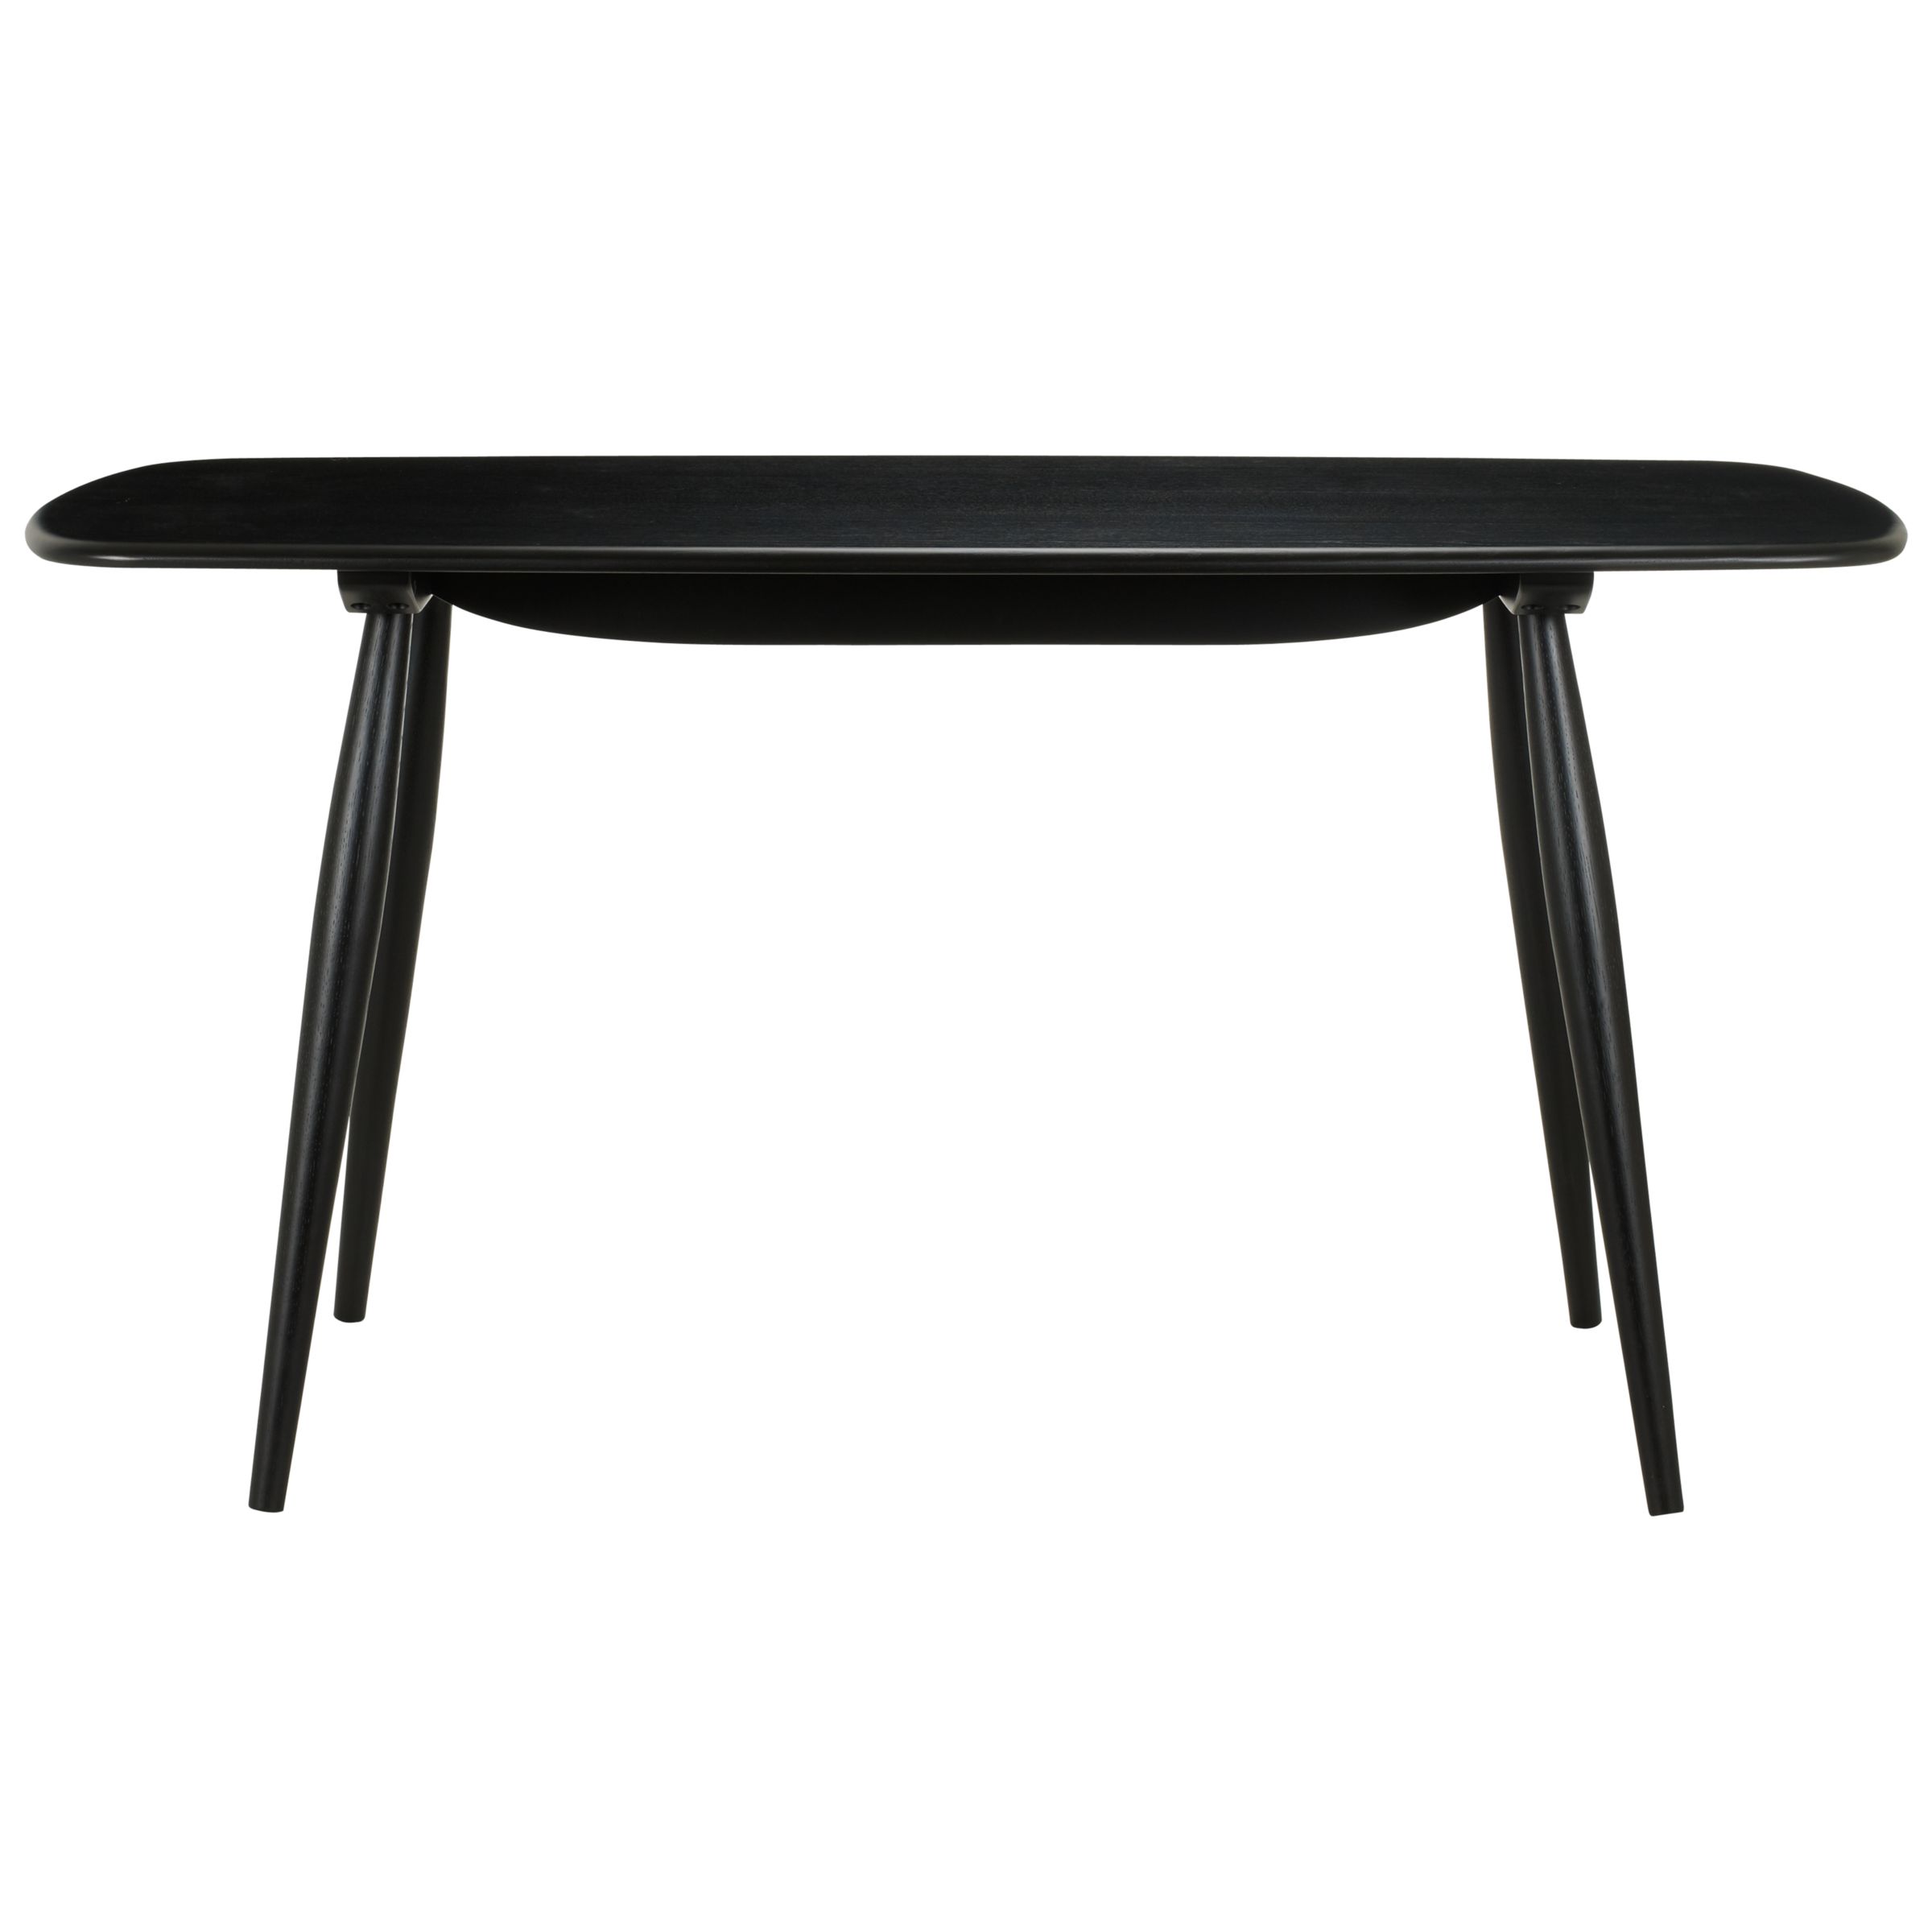 Ercol for John Lewis Chiltern Dining Table, Black